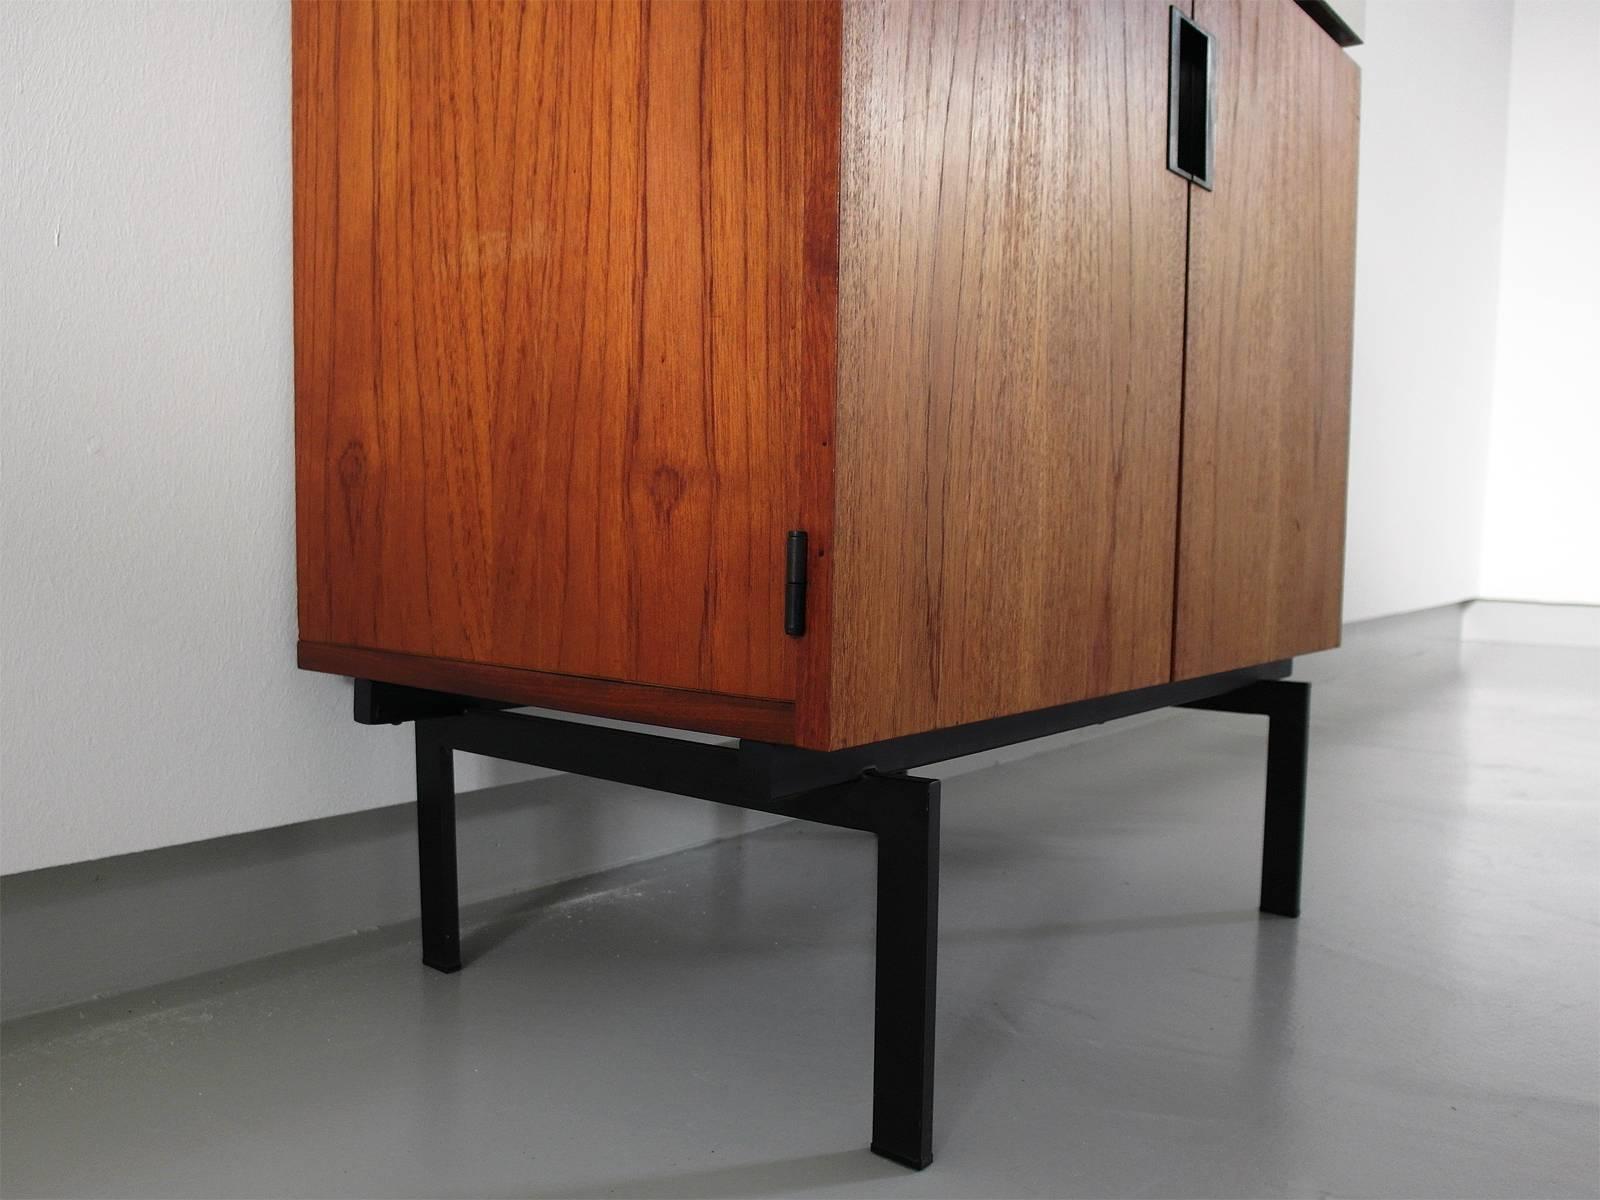 Formica Cees Braakman Cabinet CU07 for Pastoe, the Netherlands, 1958